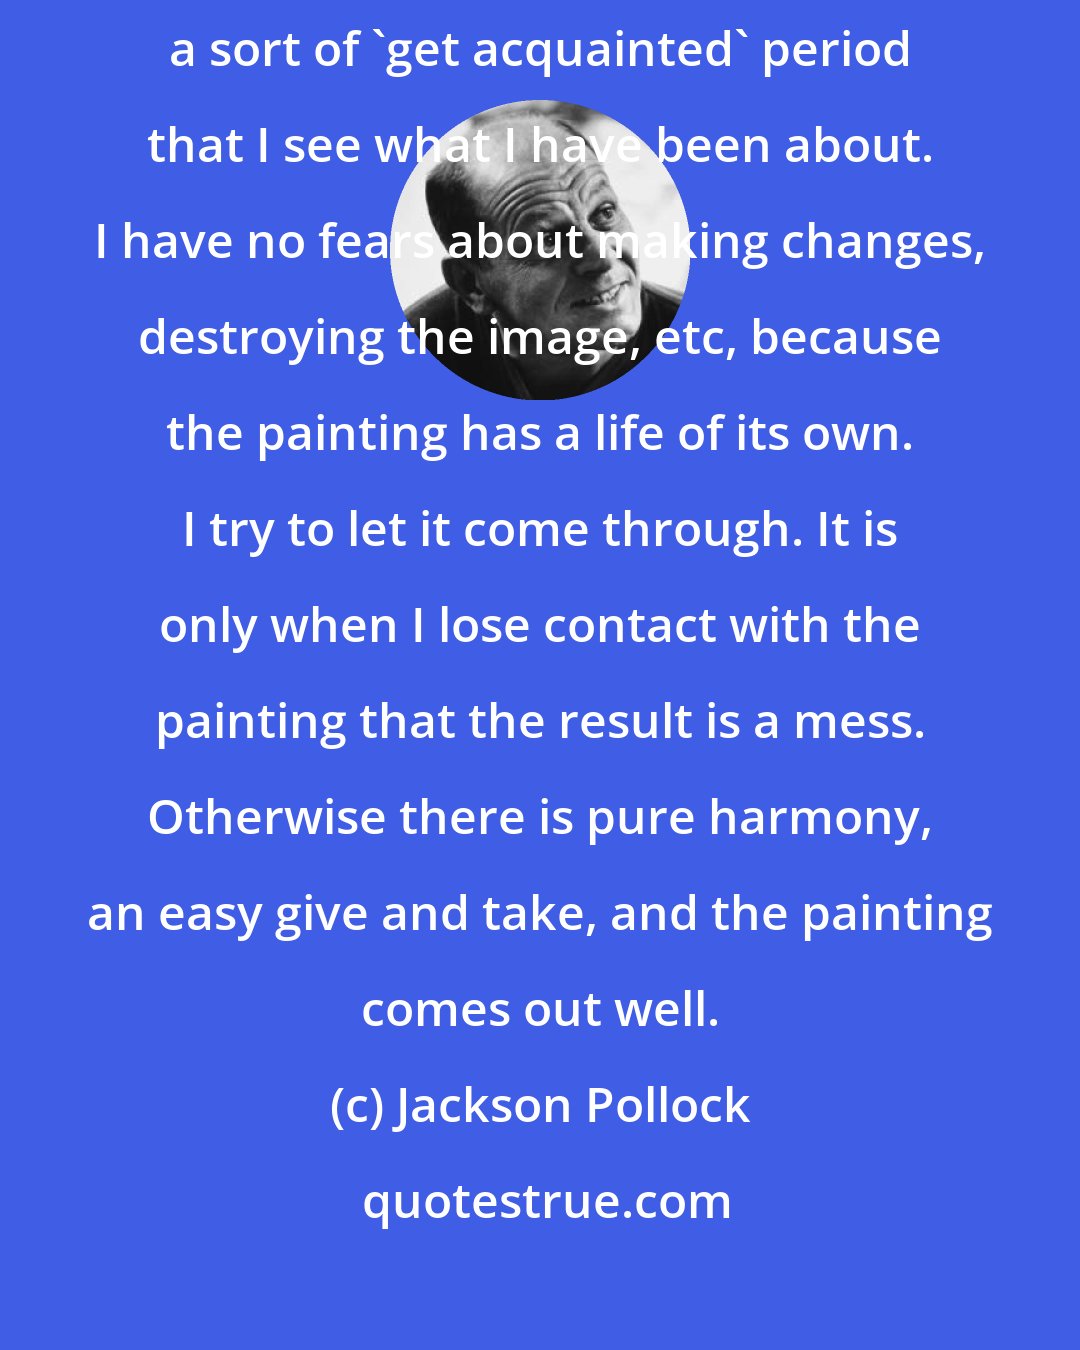 Jackson Pollock: When I am in  a painting, I'm not aware of what I'm doing. It is only after a sort of 'get acquainted' period that I see what I have been about. I have no fears about making changes, destroying the image, etc, because the painting has a life of its own. I try to let it come through. It is only when I lose contact with the painting that the result is a mess. Otherwise there is pure harmony, an easy give and take, and the painting comes out well.